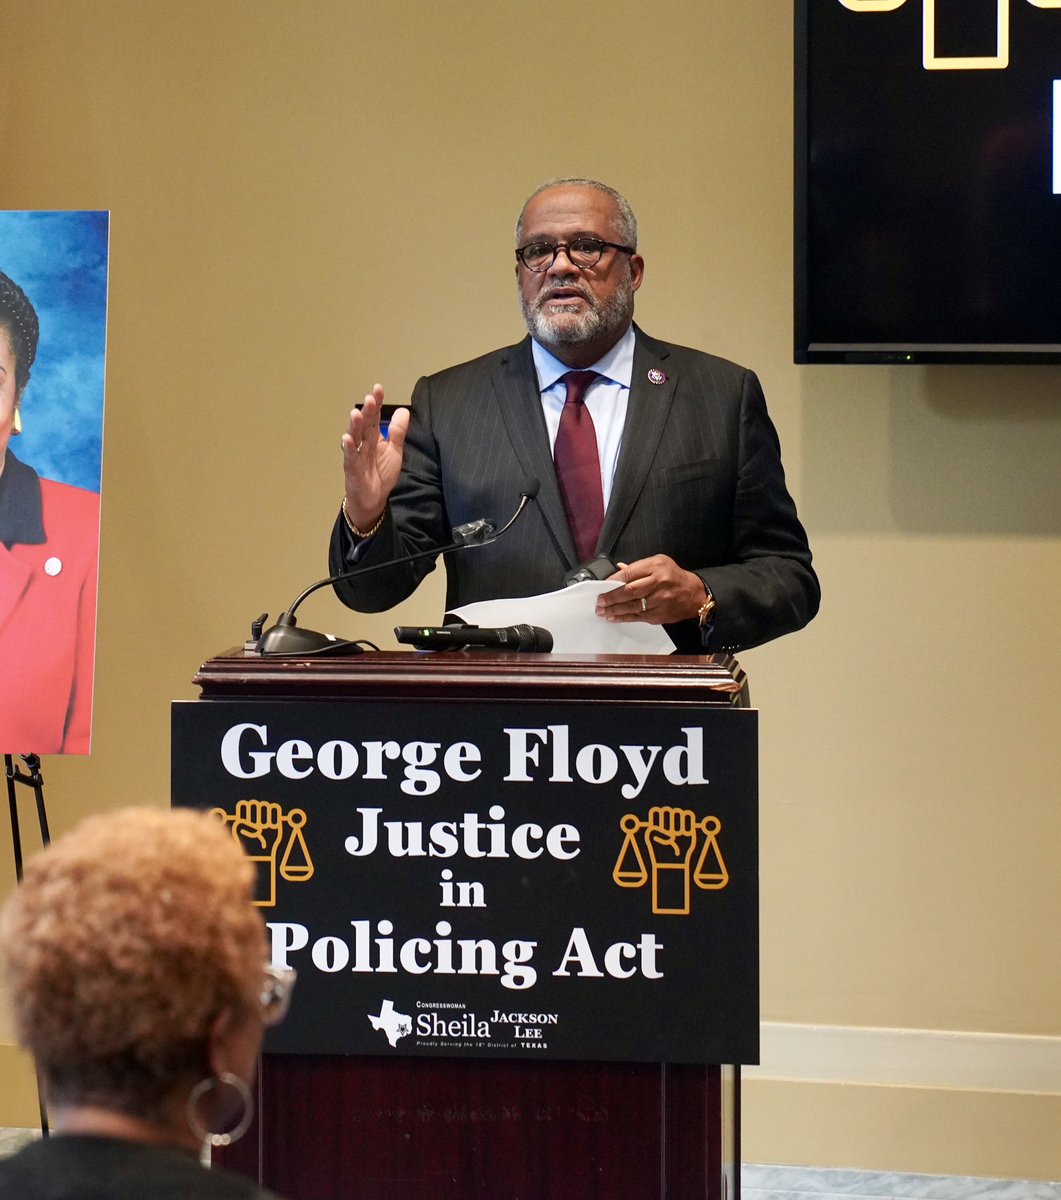 It has been four years since George Floyd was horrifically and unjustly murdered at the hands of those sworn to protect and serve. My prayers remain with his loved ones who are still mourning his loss. I was honored to stand with his family this week as we reintroduced the George